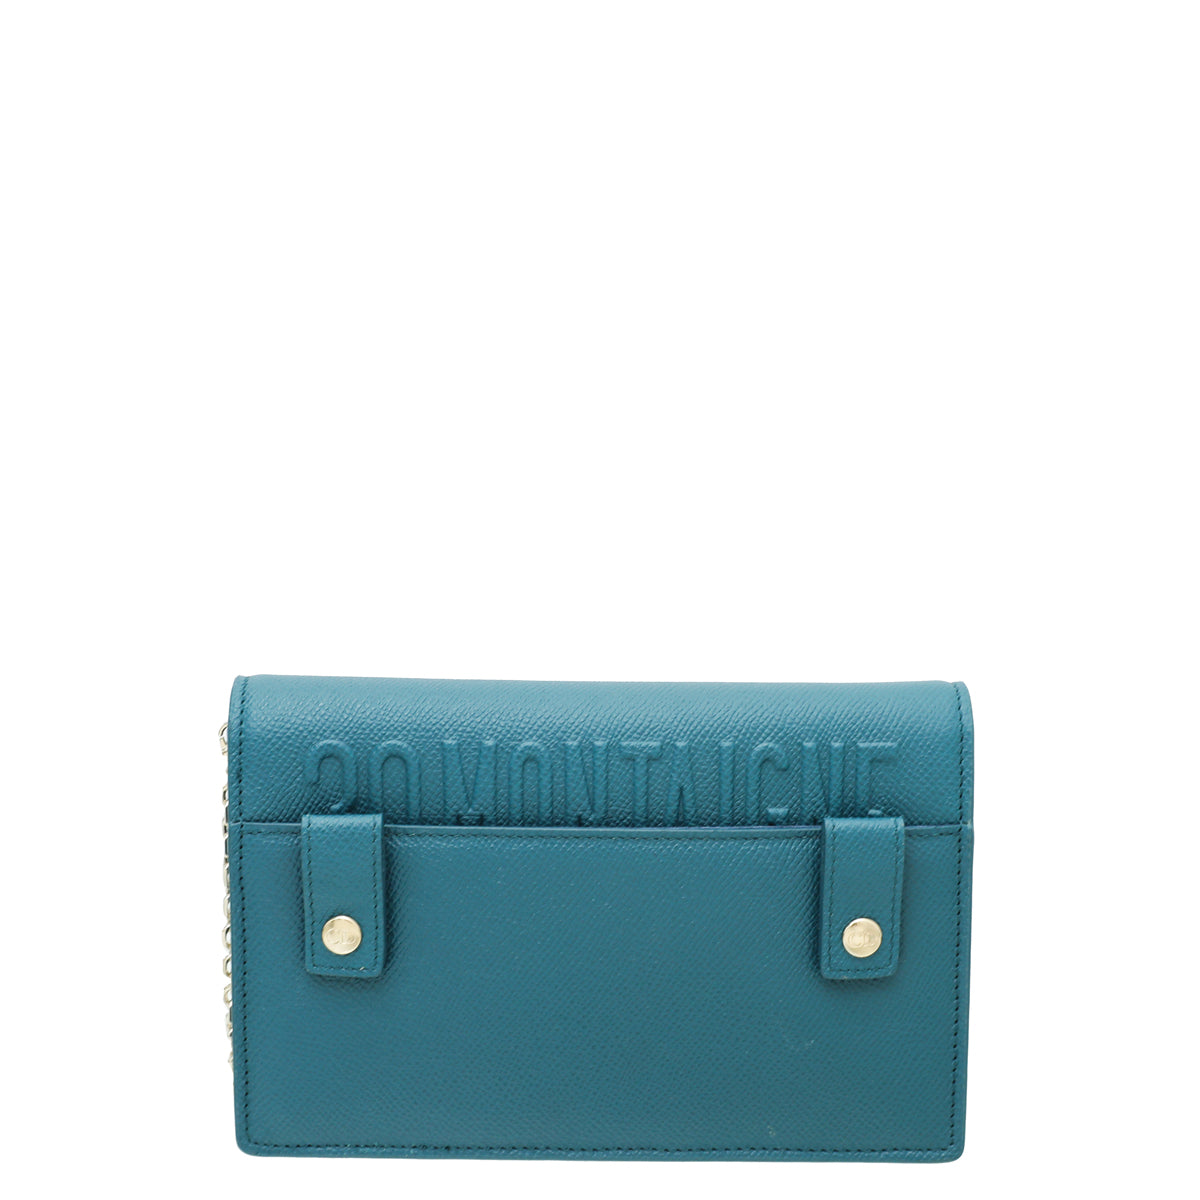 Christian Dior Turquoise 2-in-1 30 Montaigne Pouch